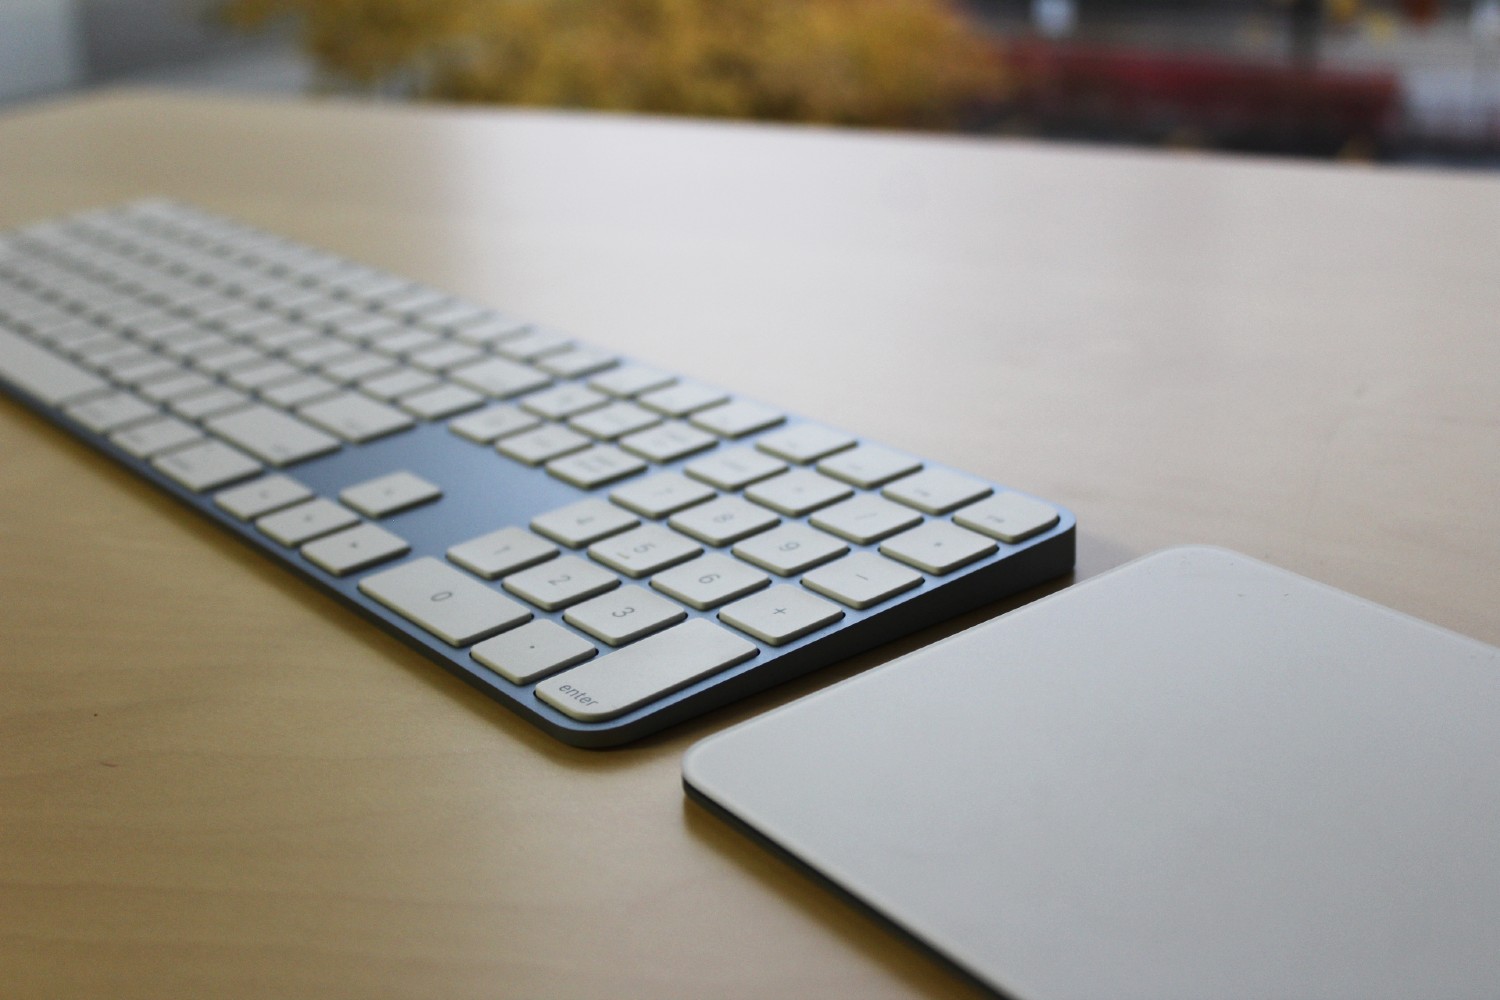 The Magic Keyboard and trackpad on a desk.